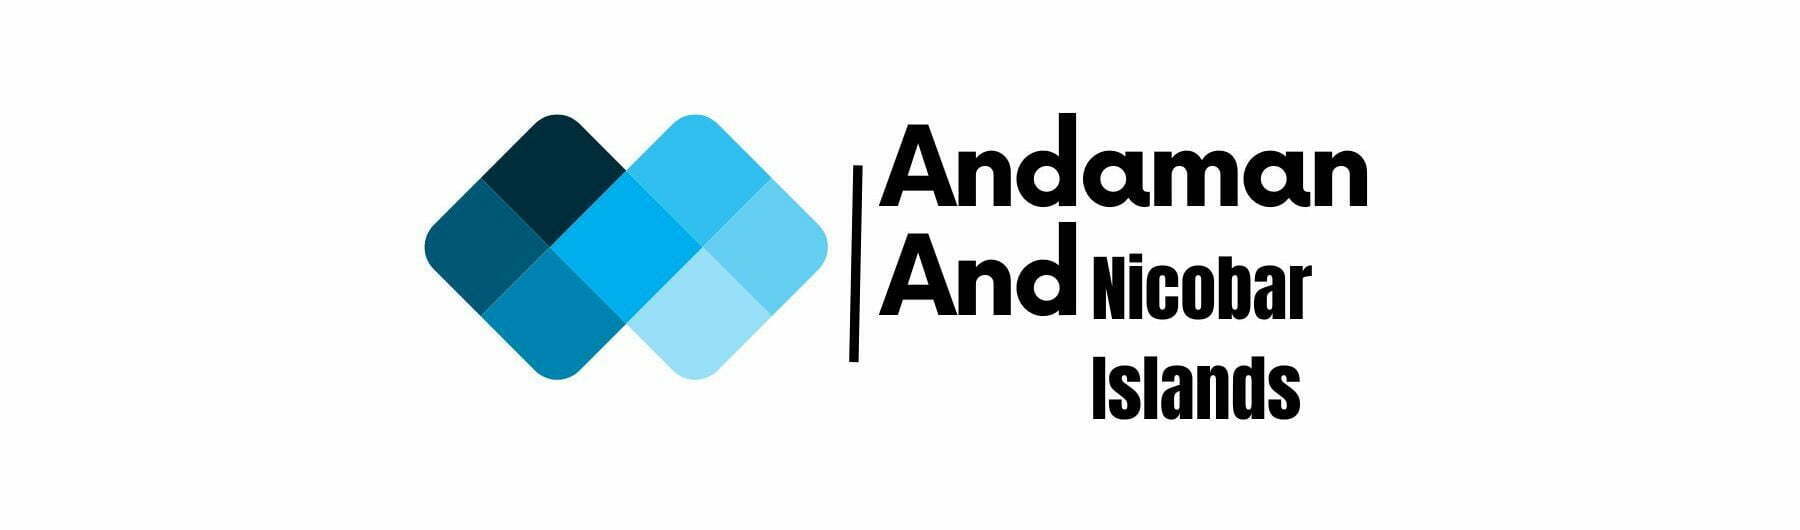 Andaman And (Label) - 1